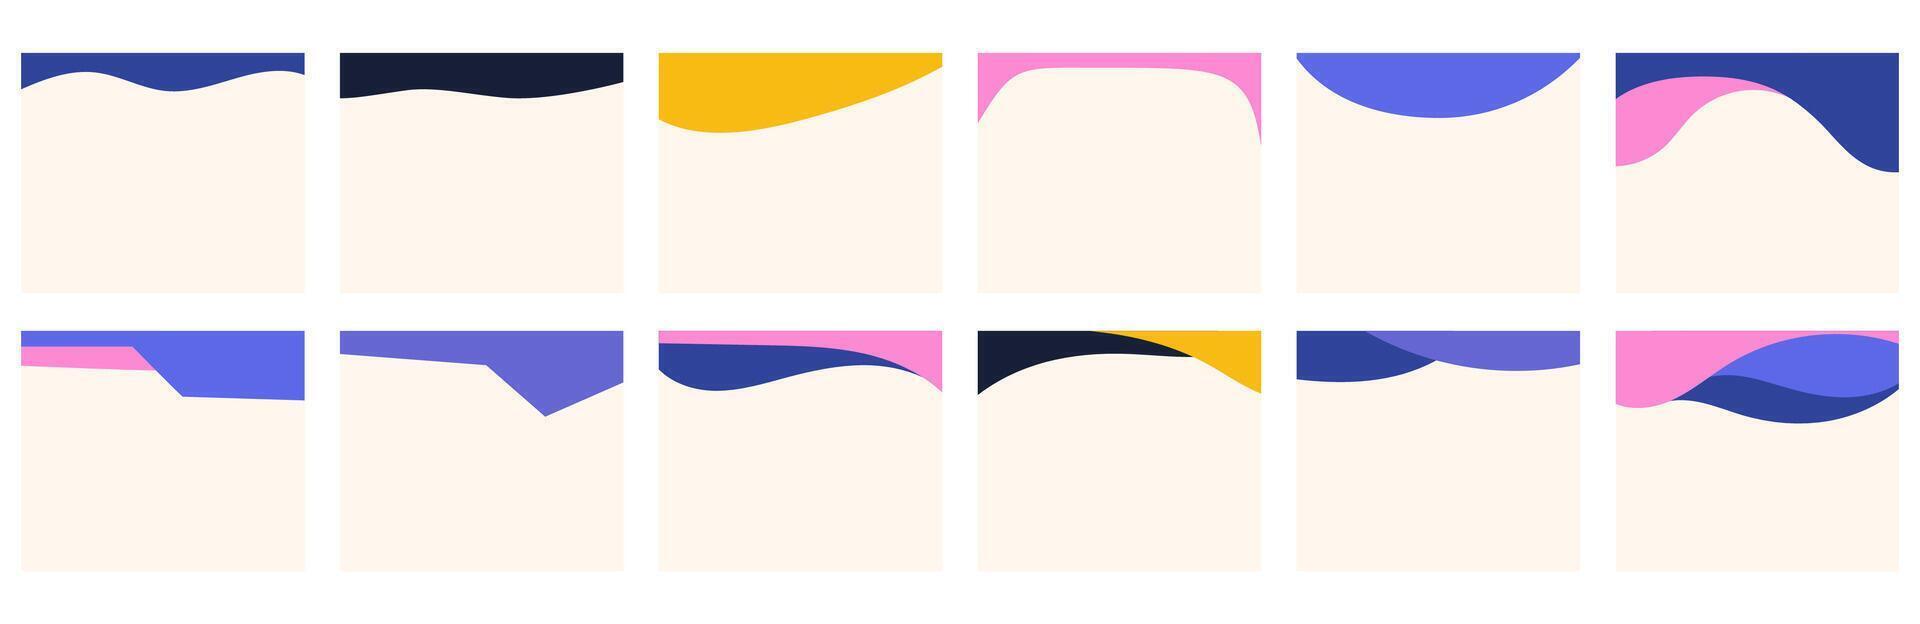 Compilation of assorted shapes suitable for headers or footers on square posts or websites. Creative separator for design simplicity in flat style. Bold colors influenced by the y2k aesthetic. vector